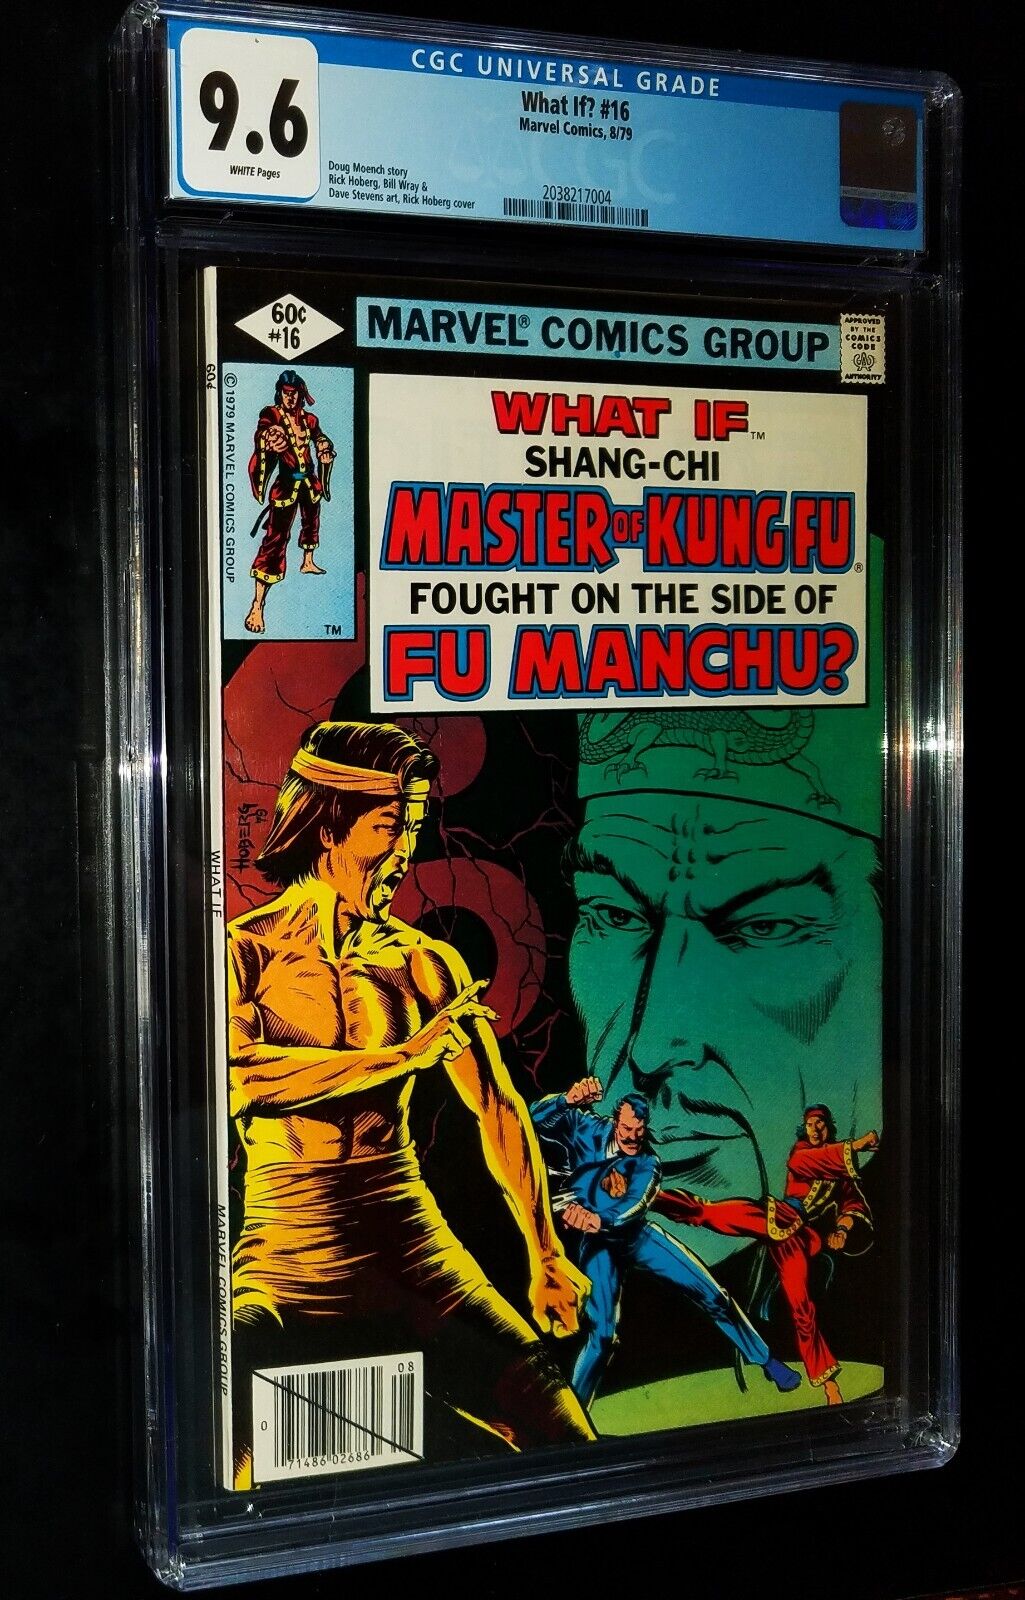 WHAT IF? CGC #16 1979 Marvel Comics CGC 9.6 NM+ White Pages Shang-Chi 0626